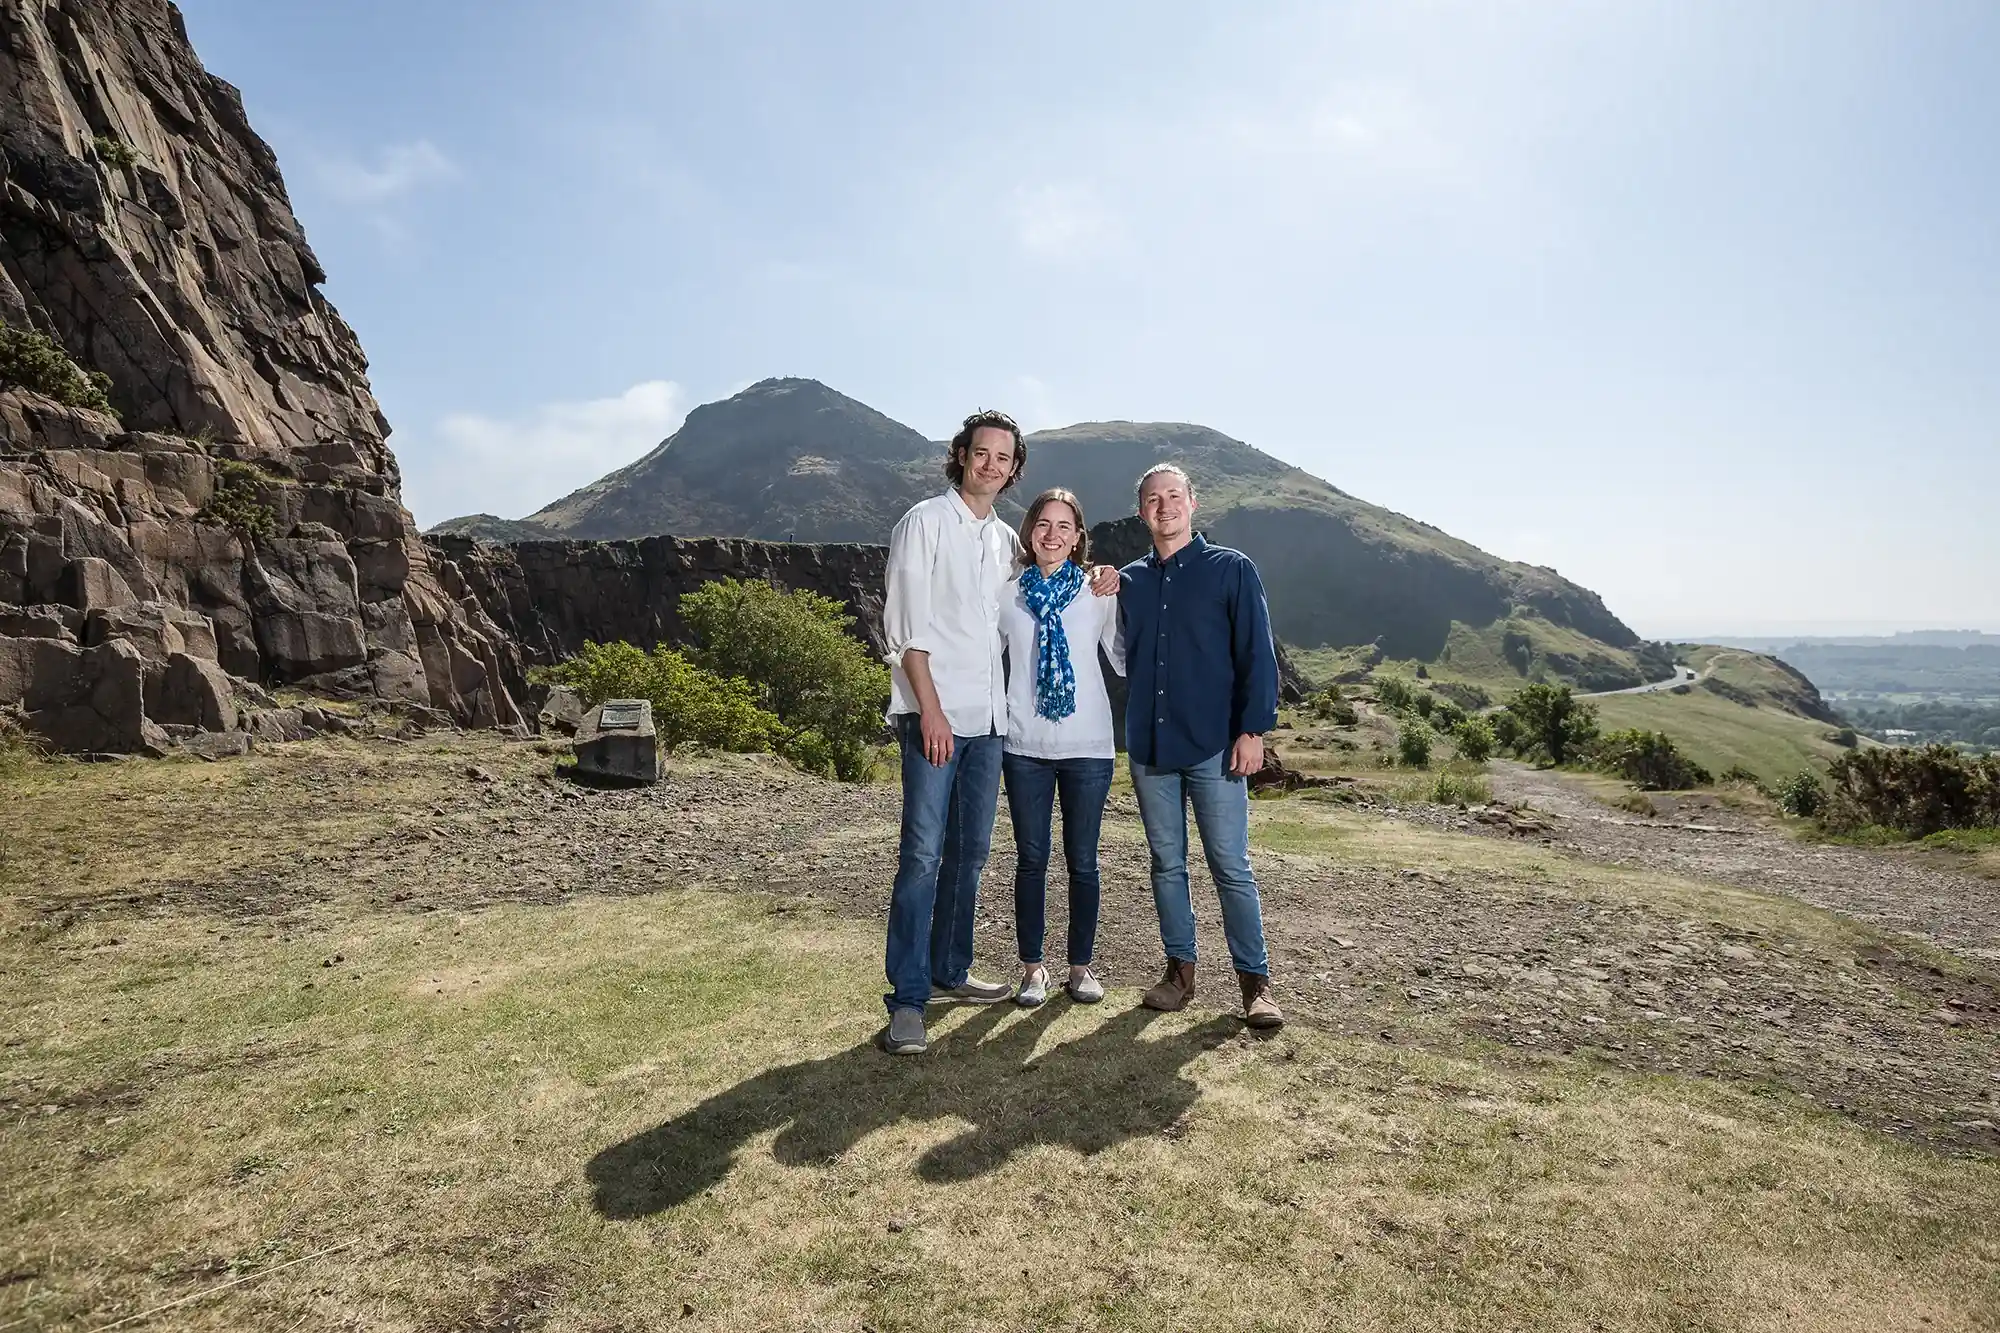 Three people stand closely together smiling, with rocky hills and a clear sky in the background.